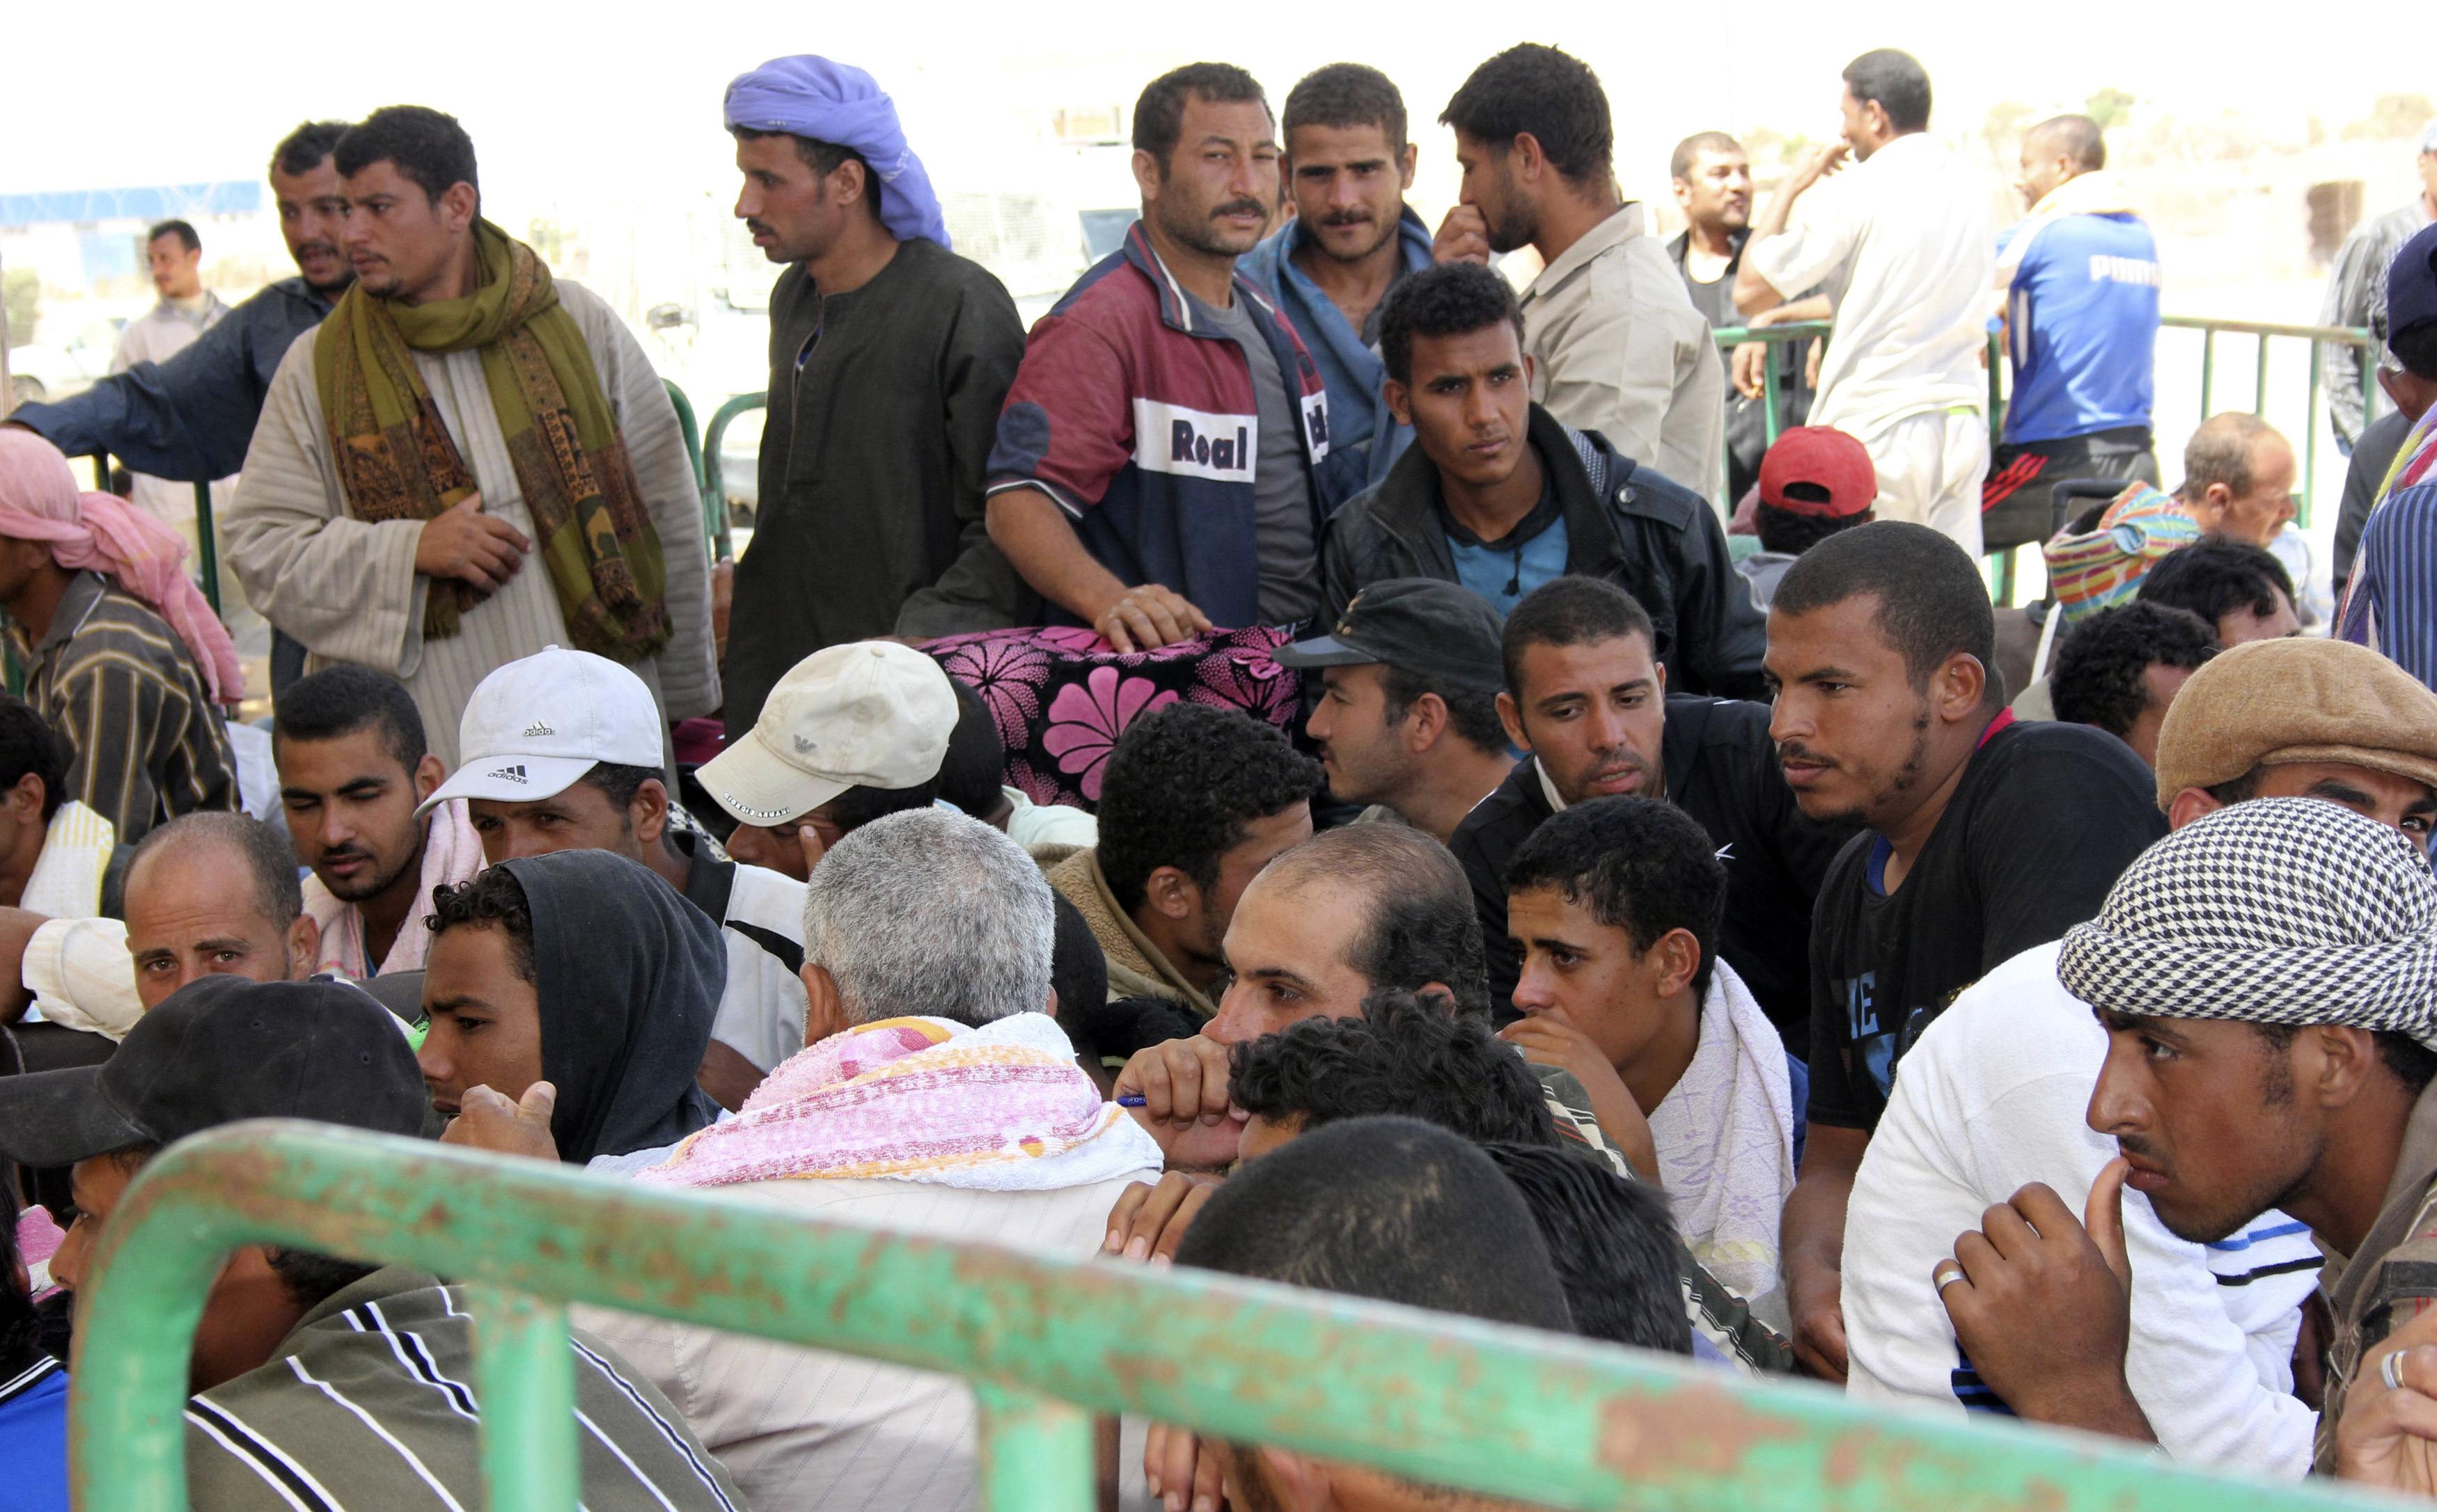 25,529 Egyptians back from Libya - Foreign Ministry